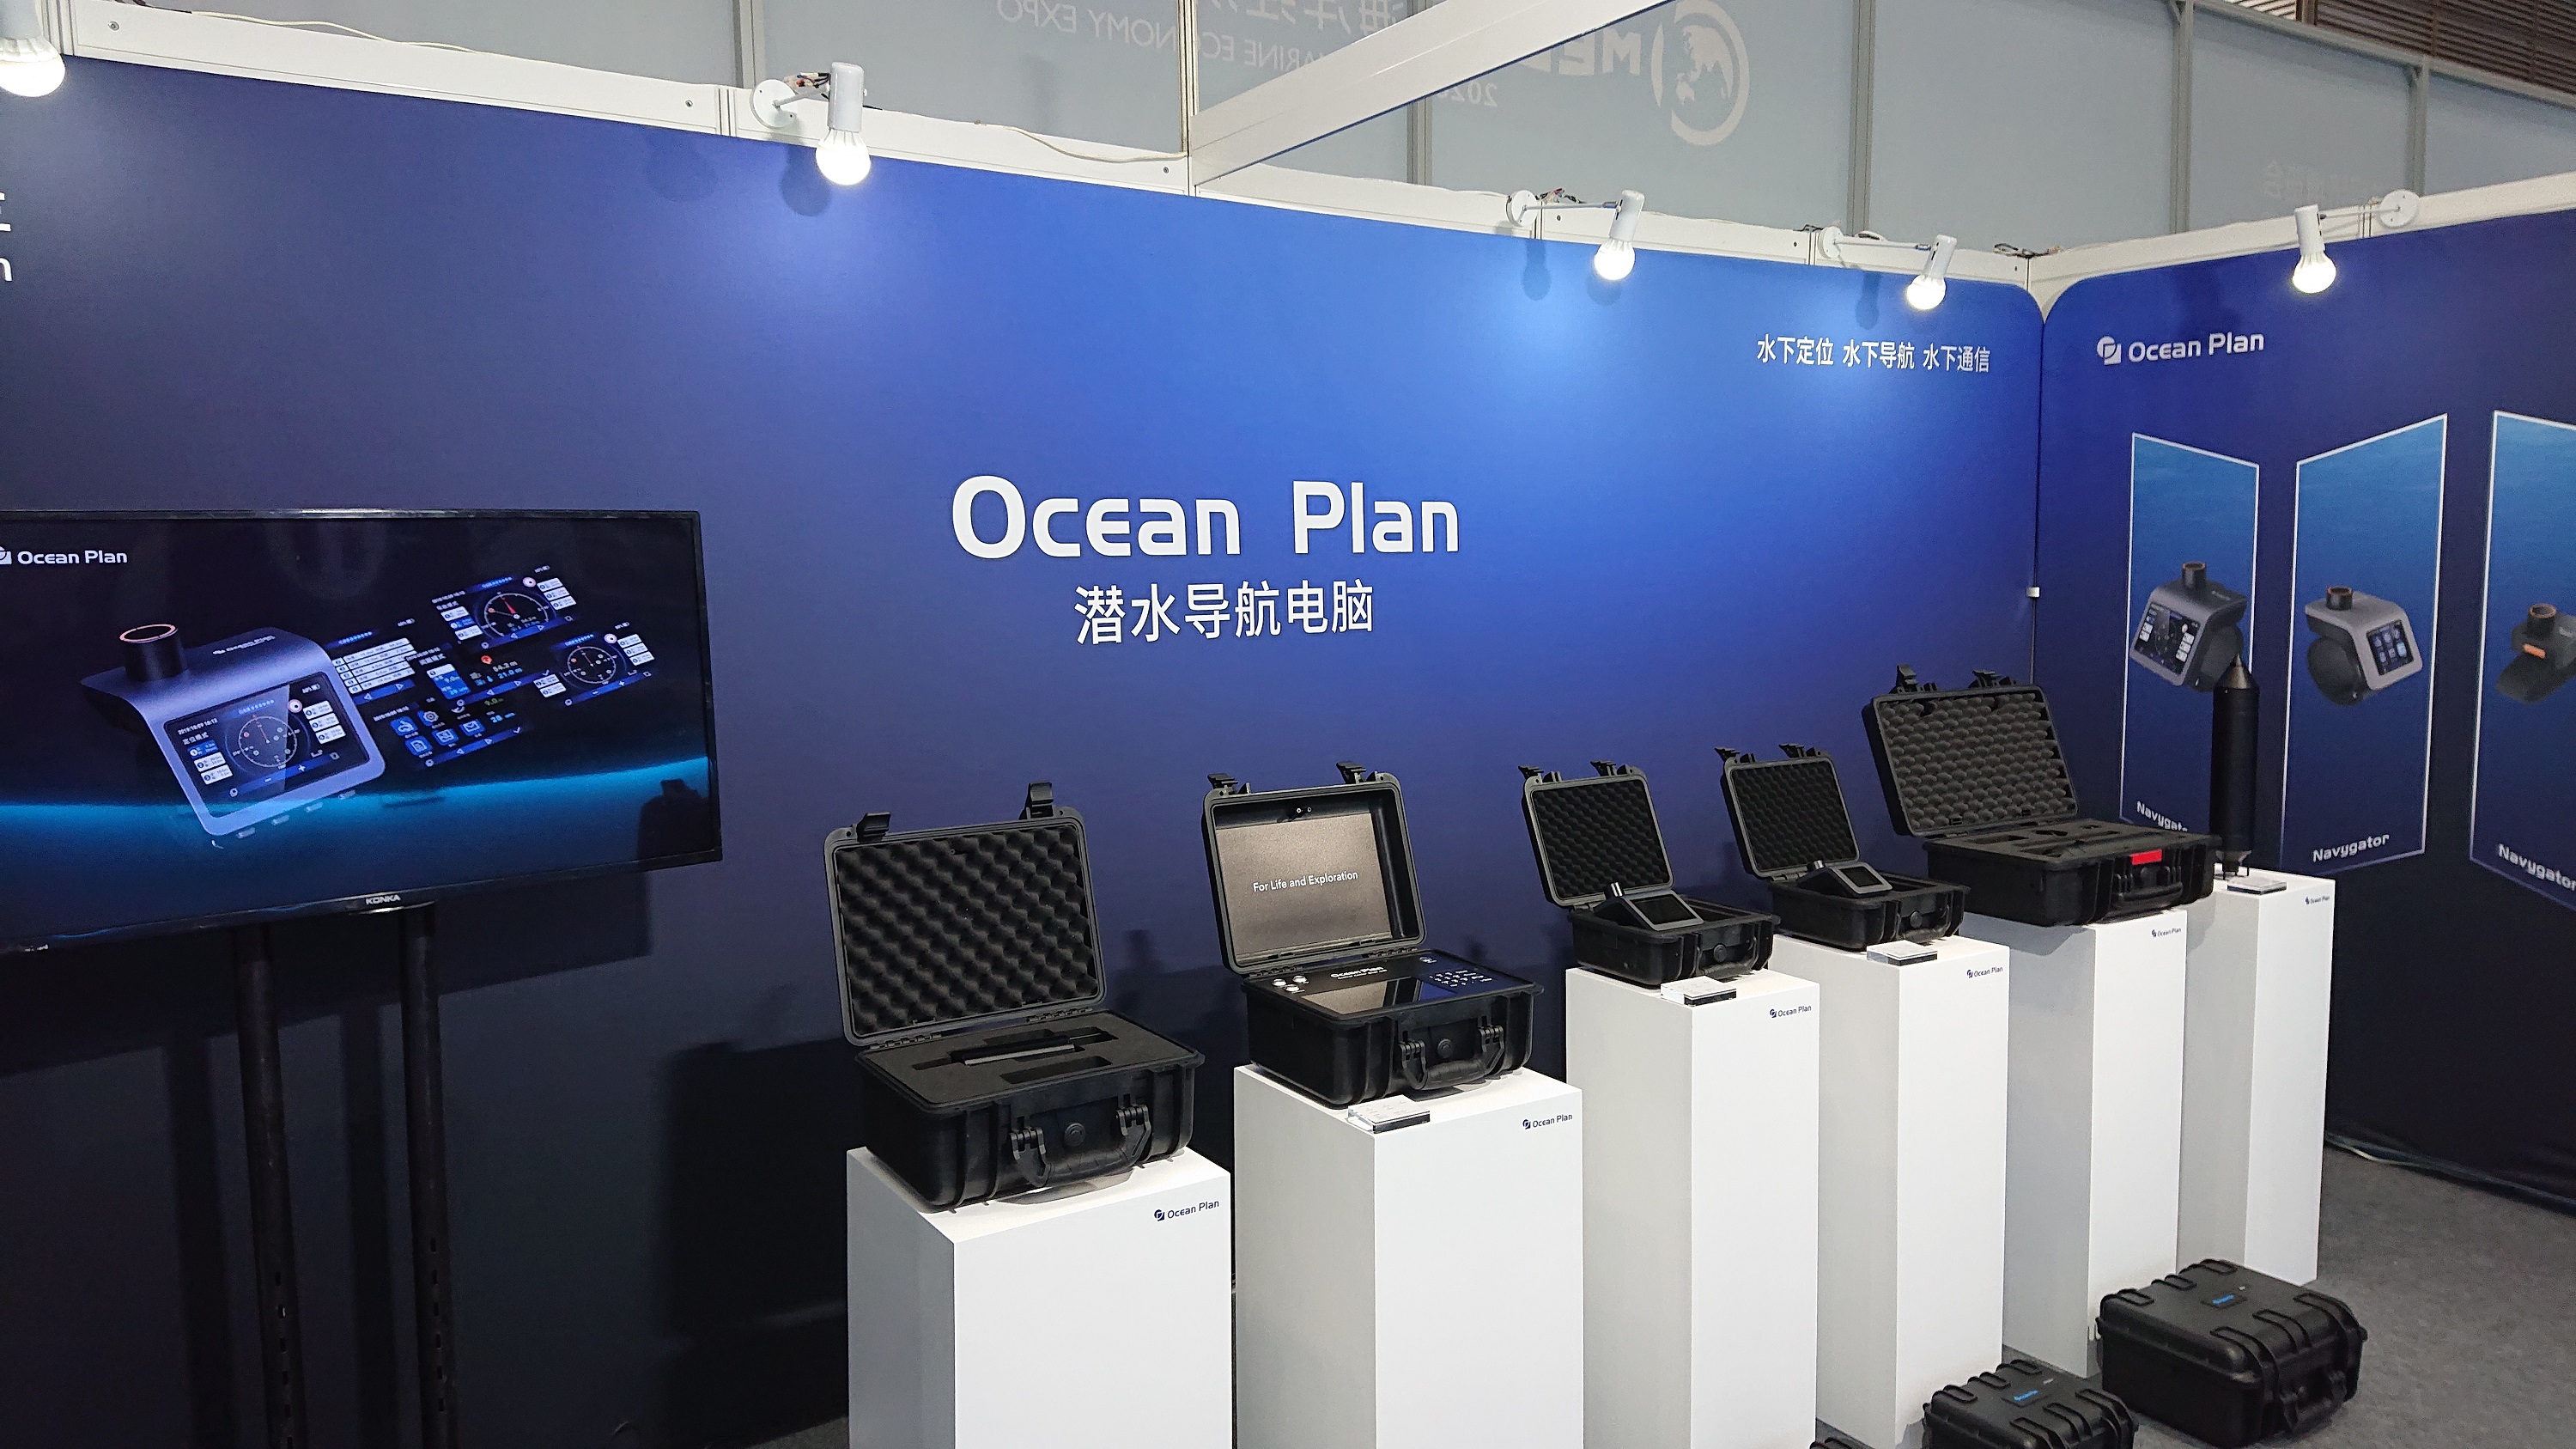 Ocean Plan shows China's strength in CMEE